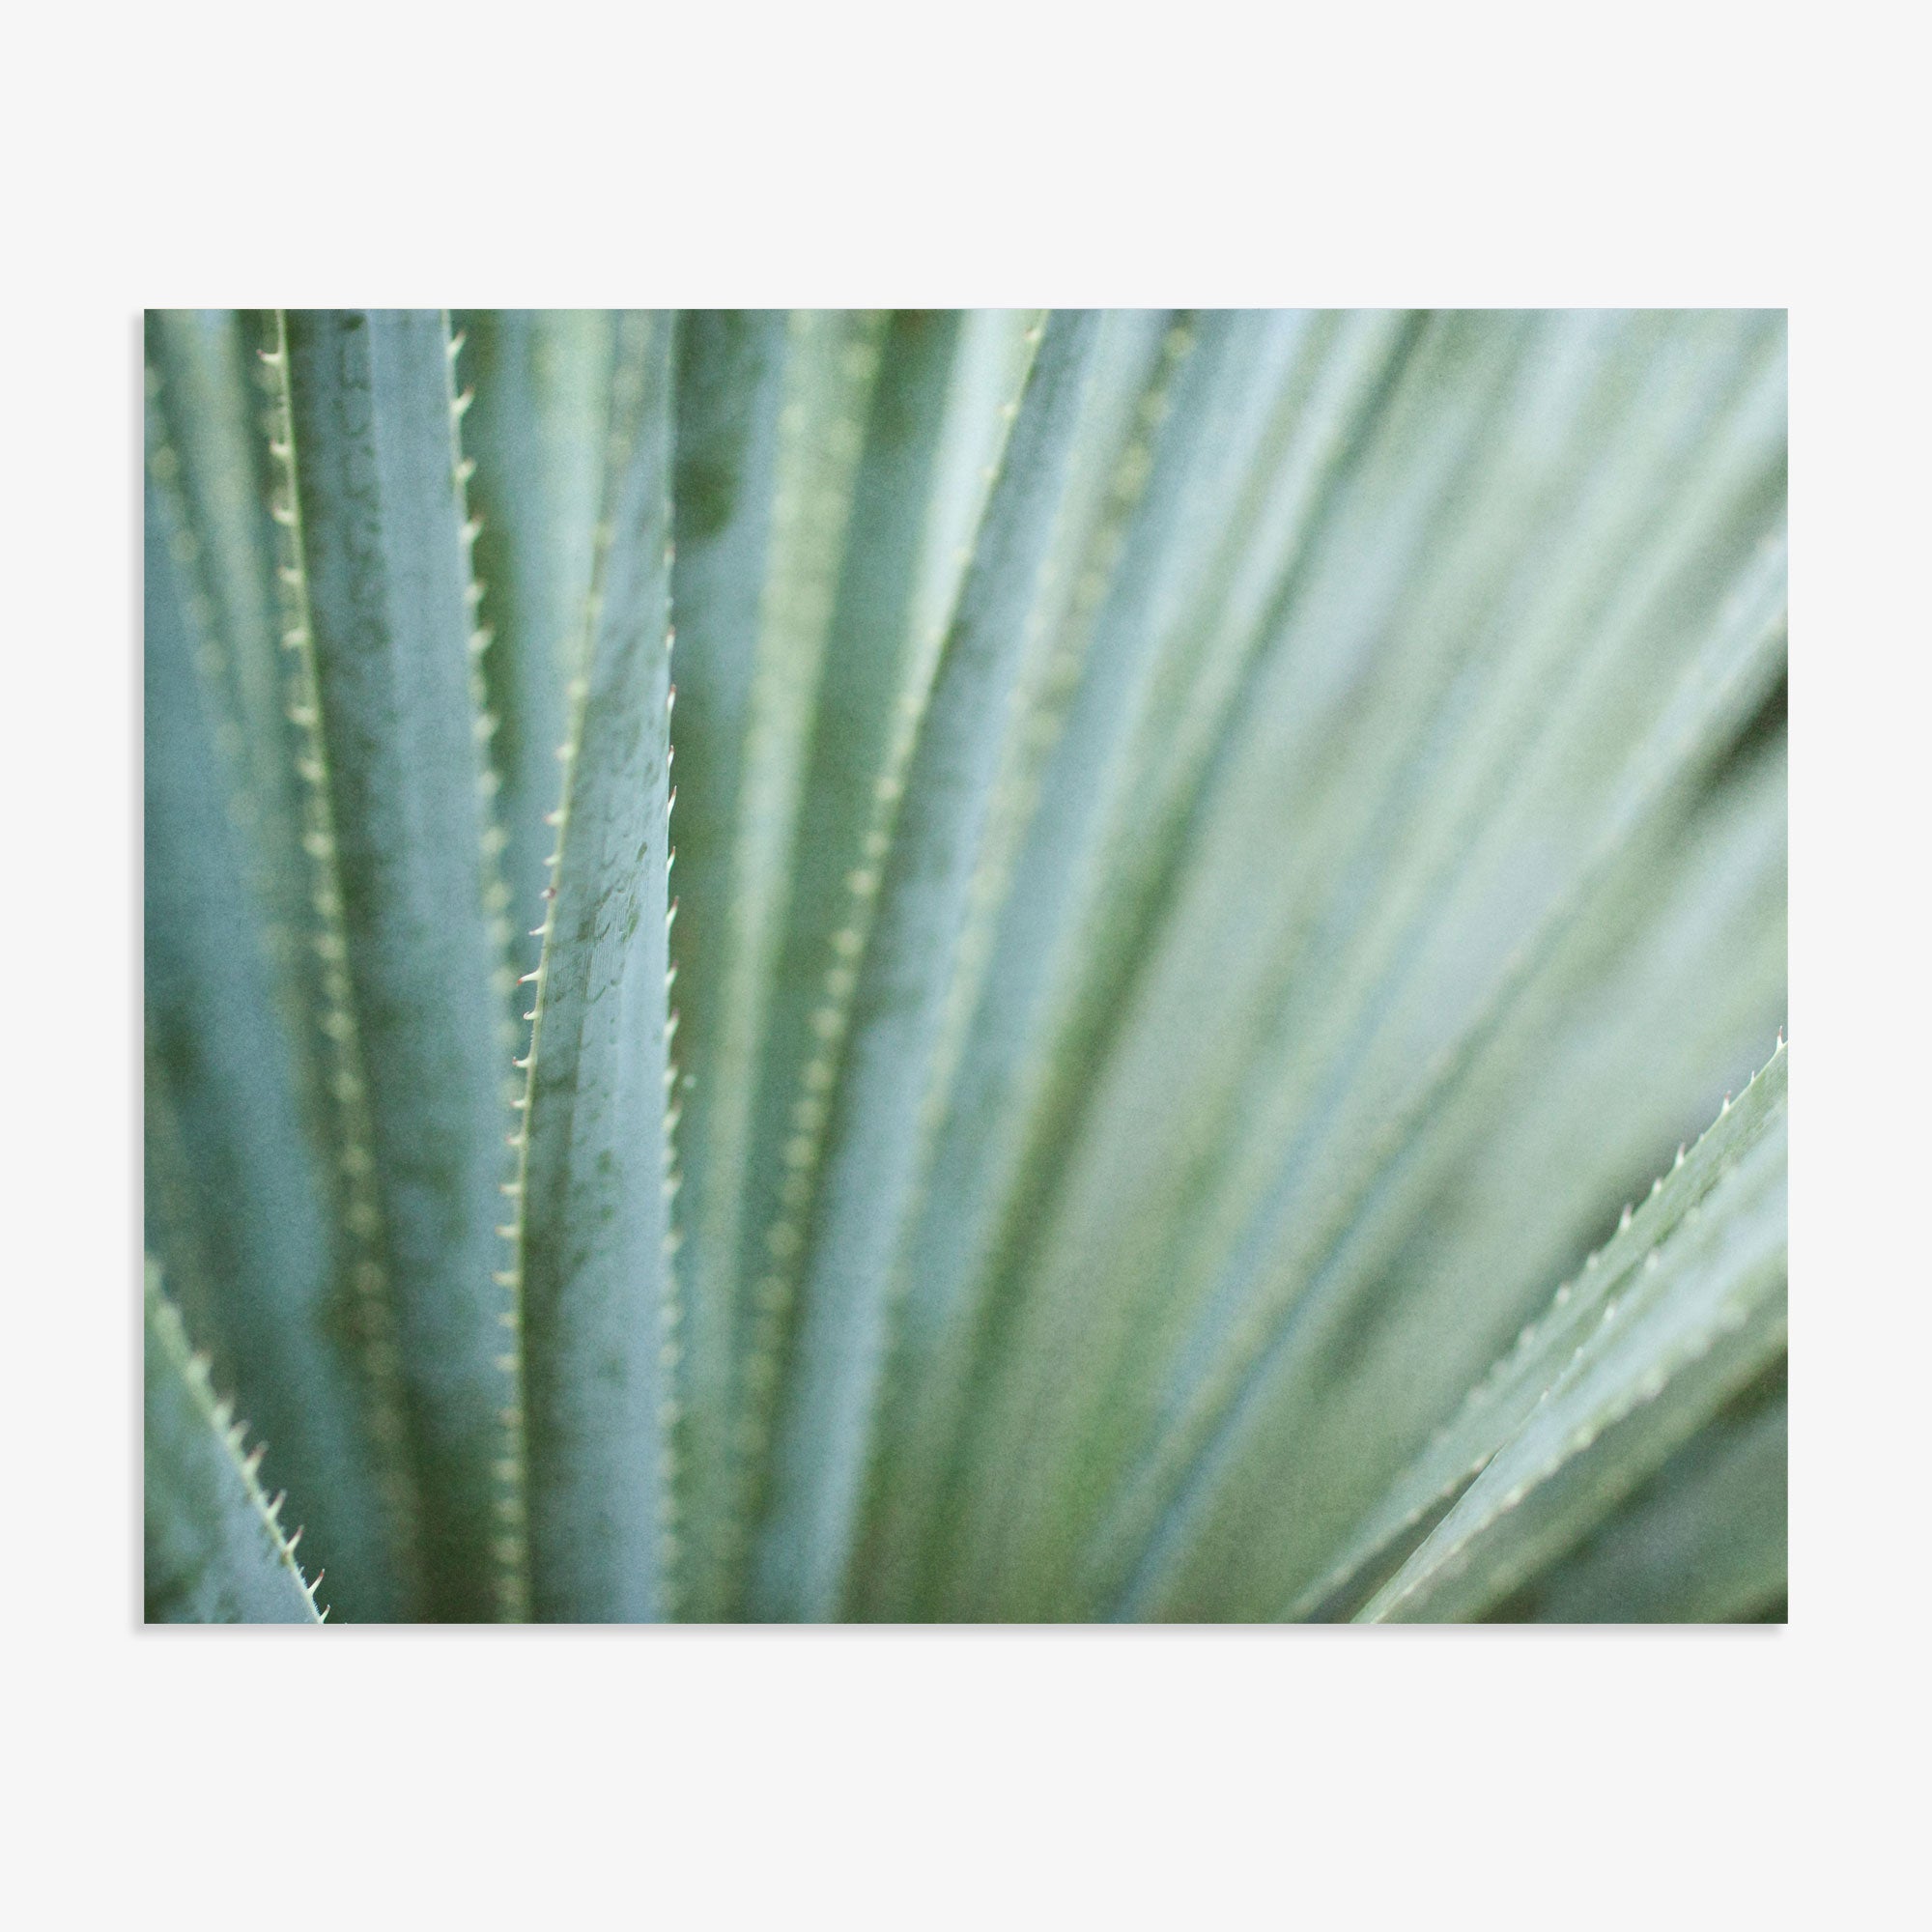 Close-up of a blue agave plant showing the sharp, pointed edges of its thick green leaves, with a soft focus on the background enhancing the texture details on Offley Green&#39;s Abstract Green Botanical Print, &#39;Strands and Spikes&#39;.